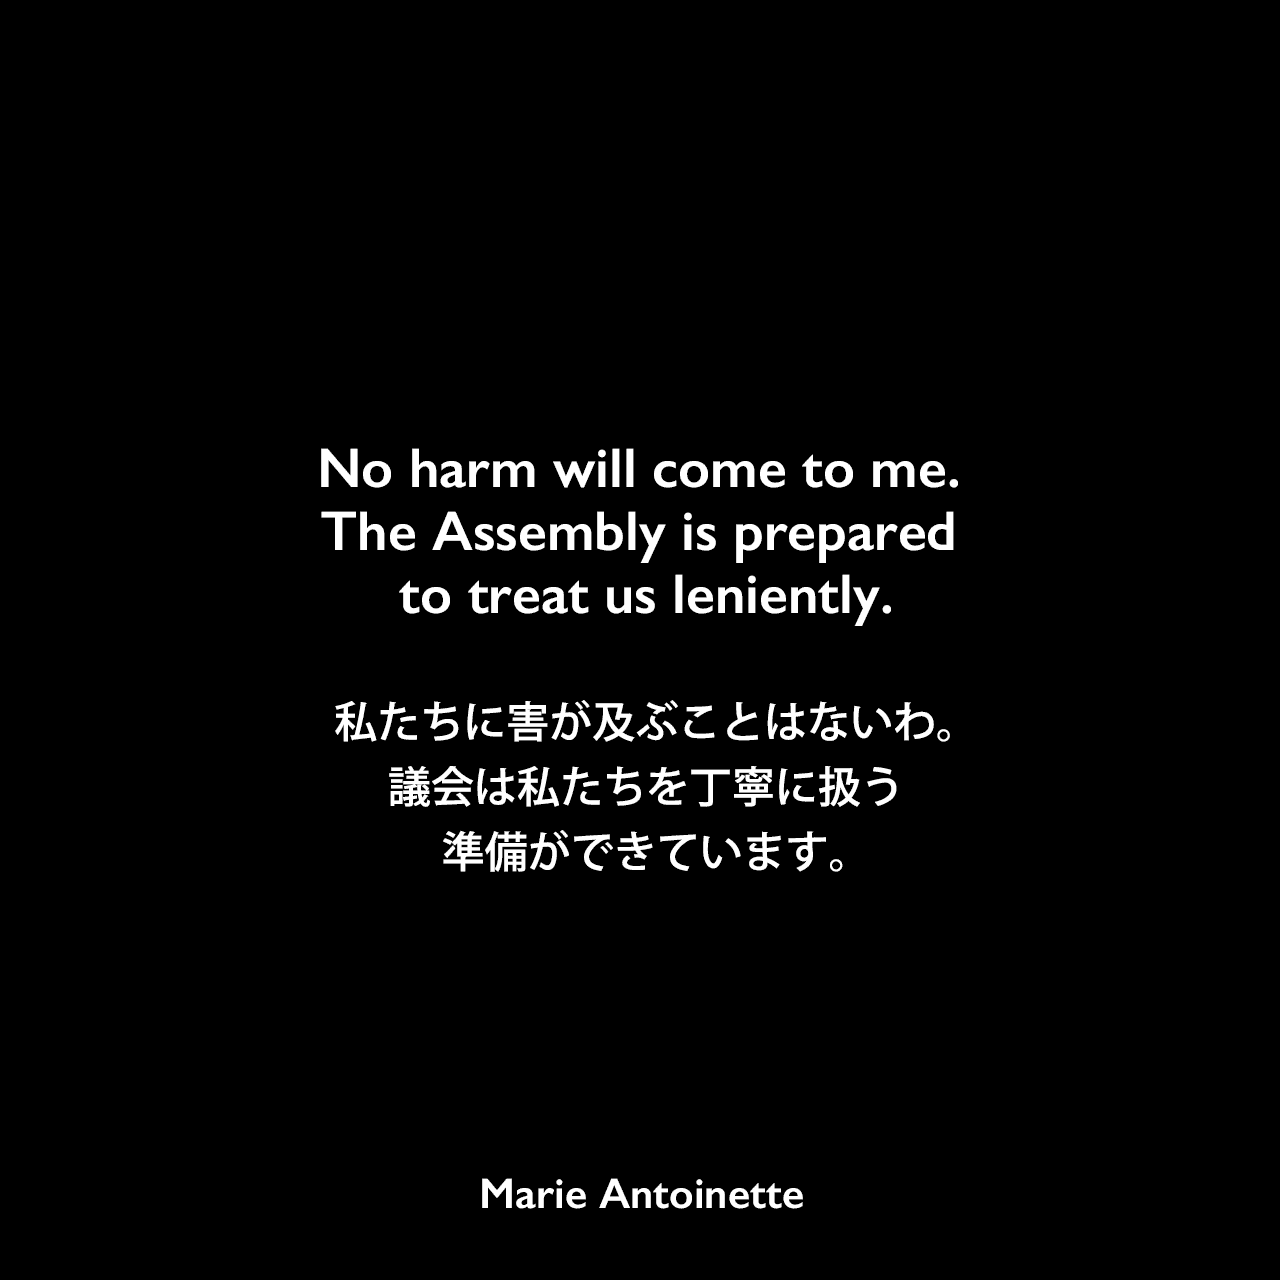 No harm will come to me. The Assembly is prepared to treat us leniently.私たちに害が及ぶことはないわ。議会は私たちを丁寧に扱う準備ができています。Marie Antoinette